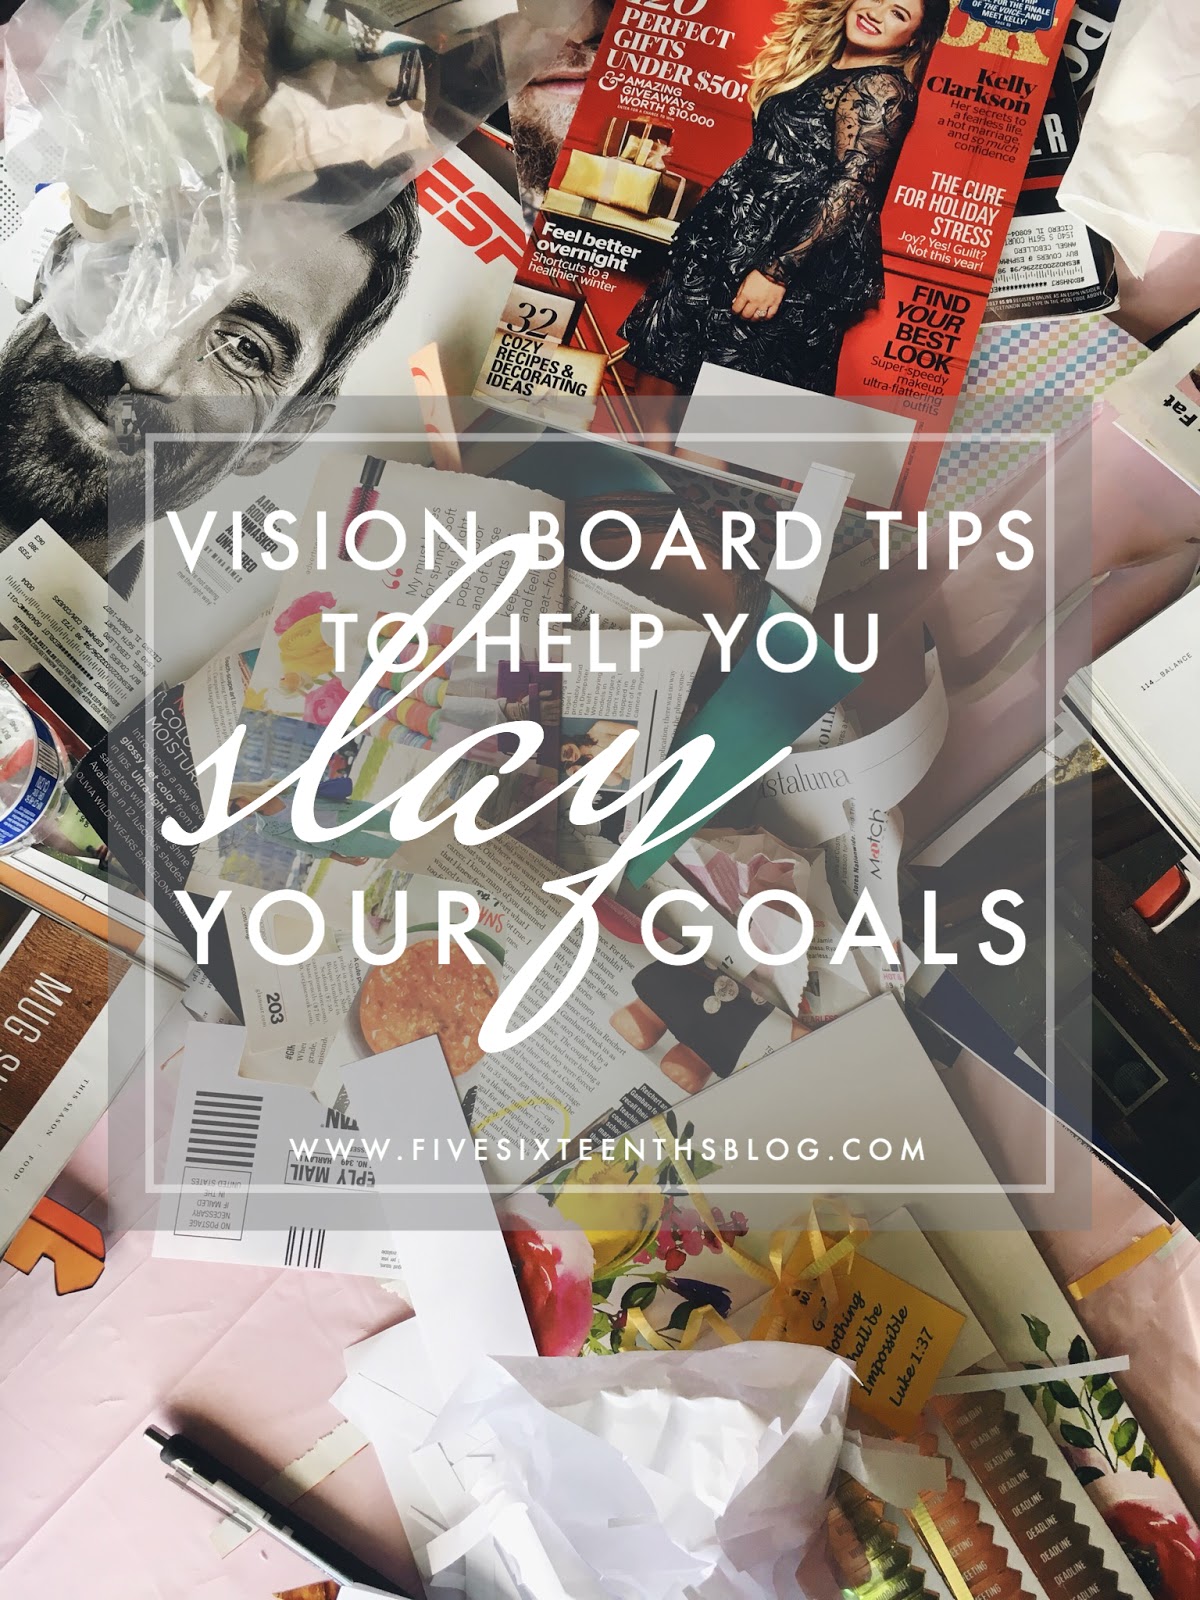 Five Sixteenths Blog 5 Vision Board Tips To Help You Slay Your Goals